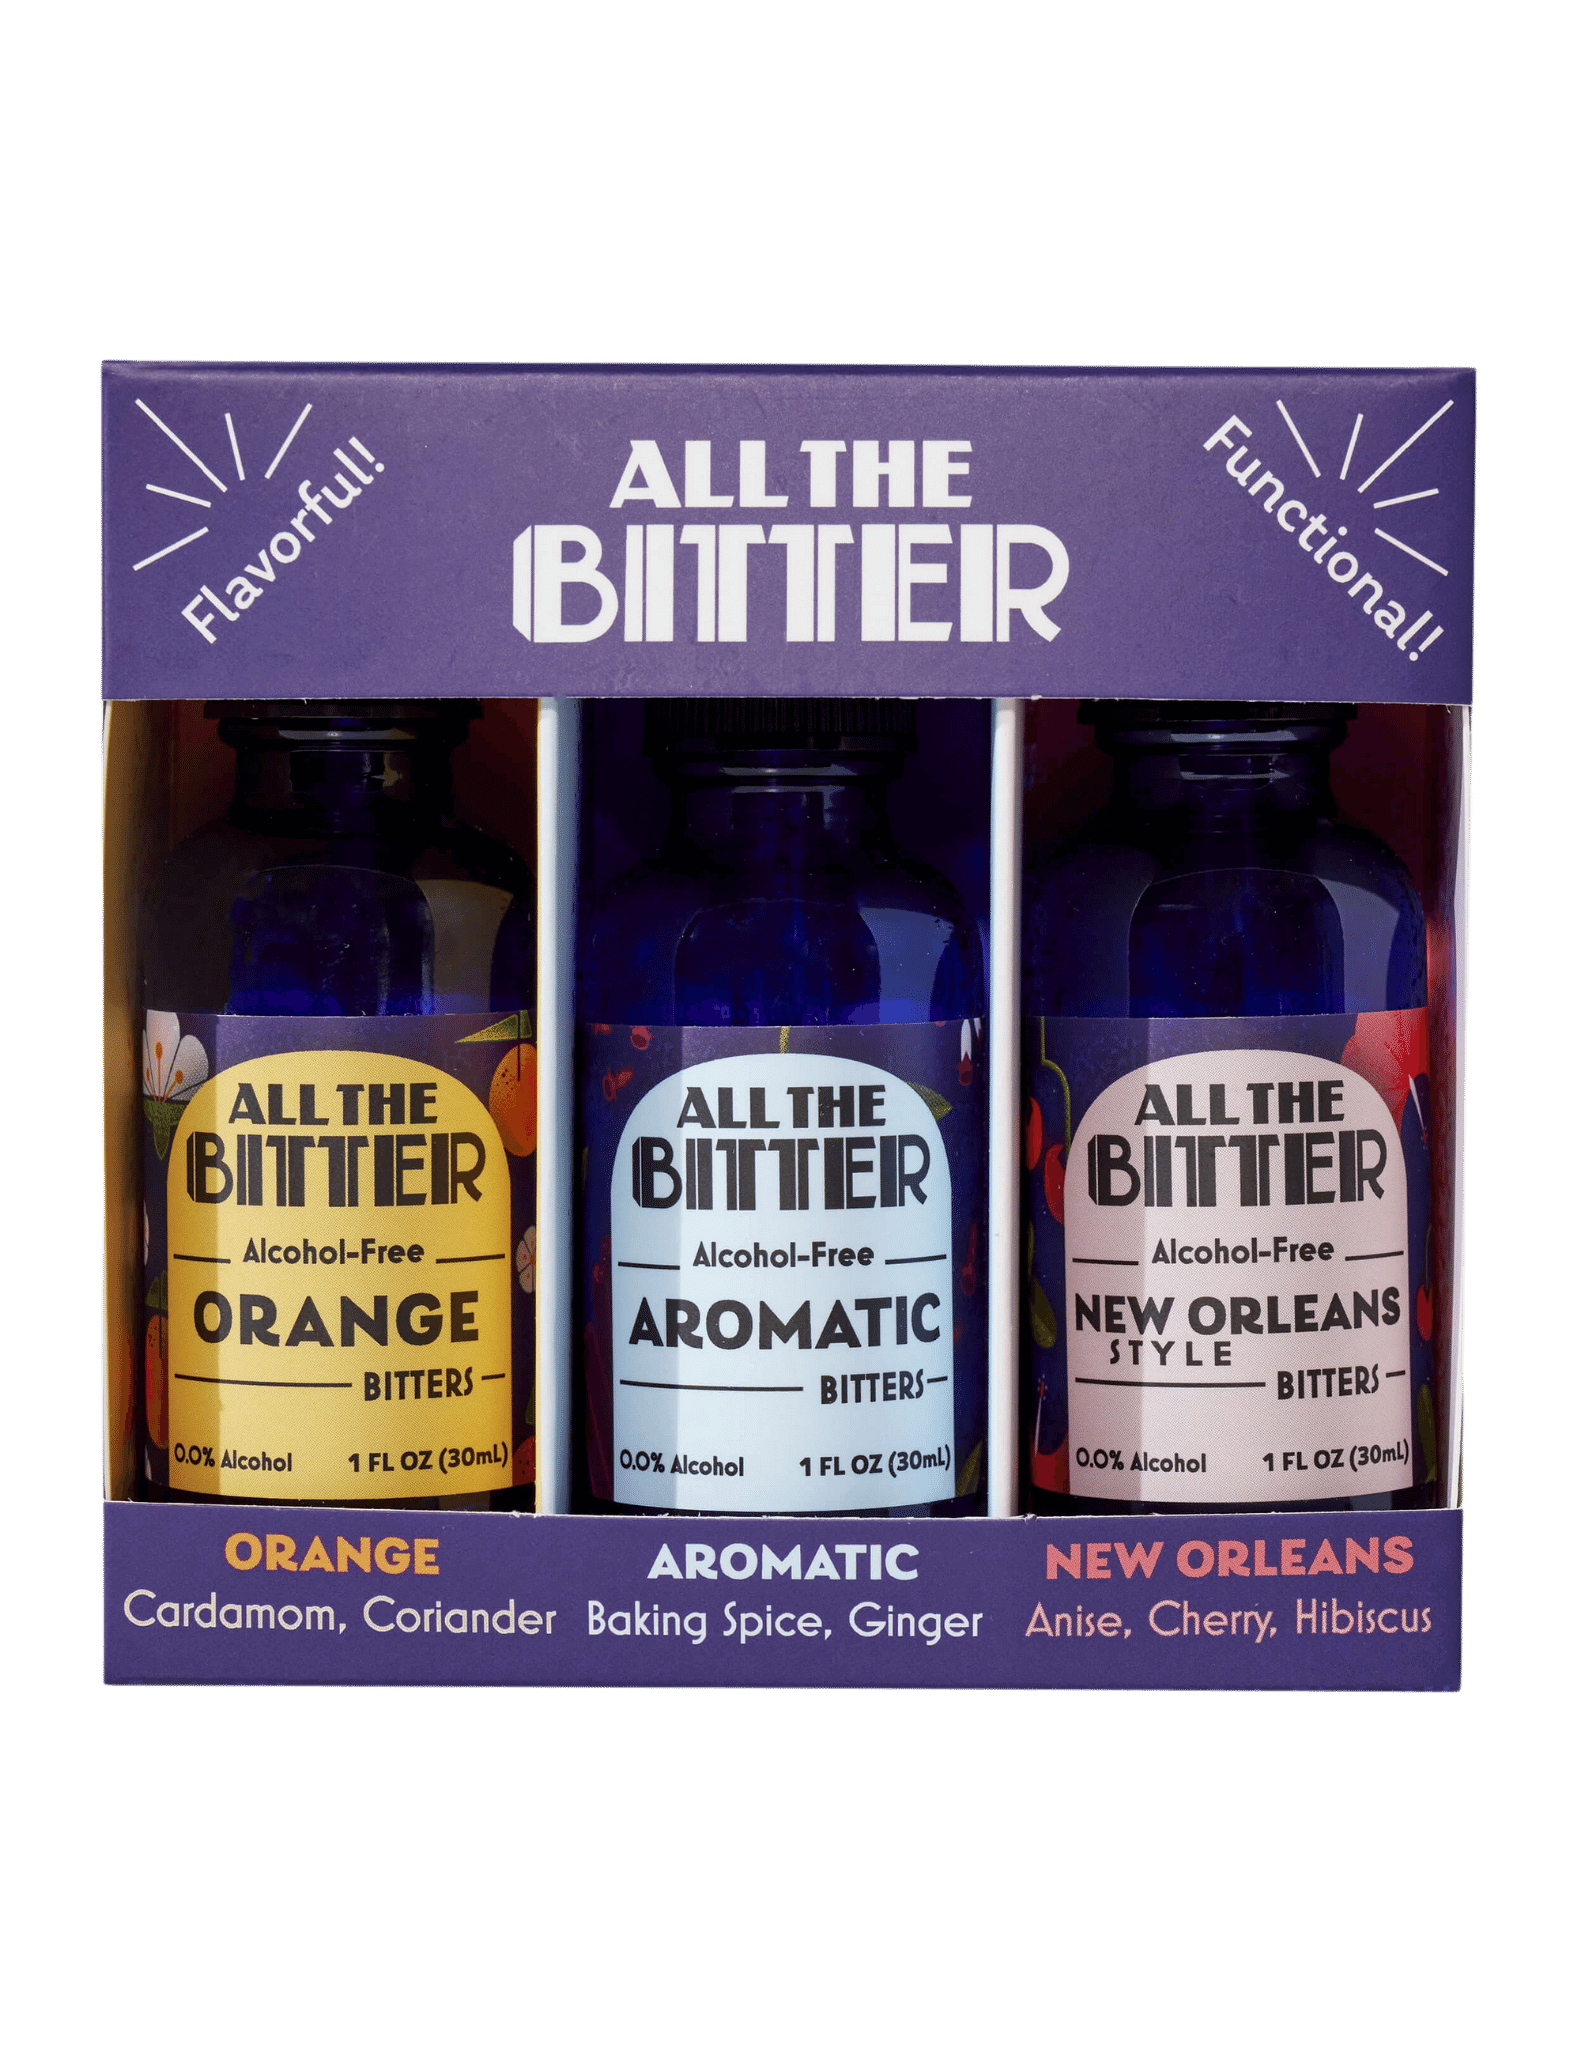 Classic Bitters Travel Pack by All The Bitter